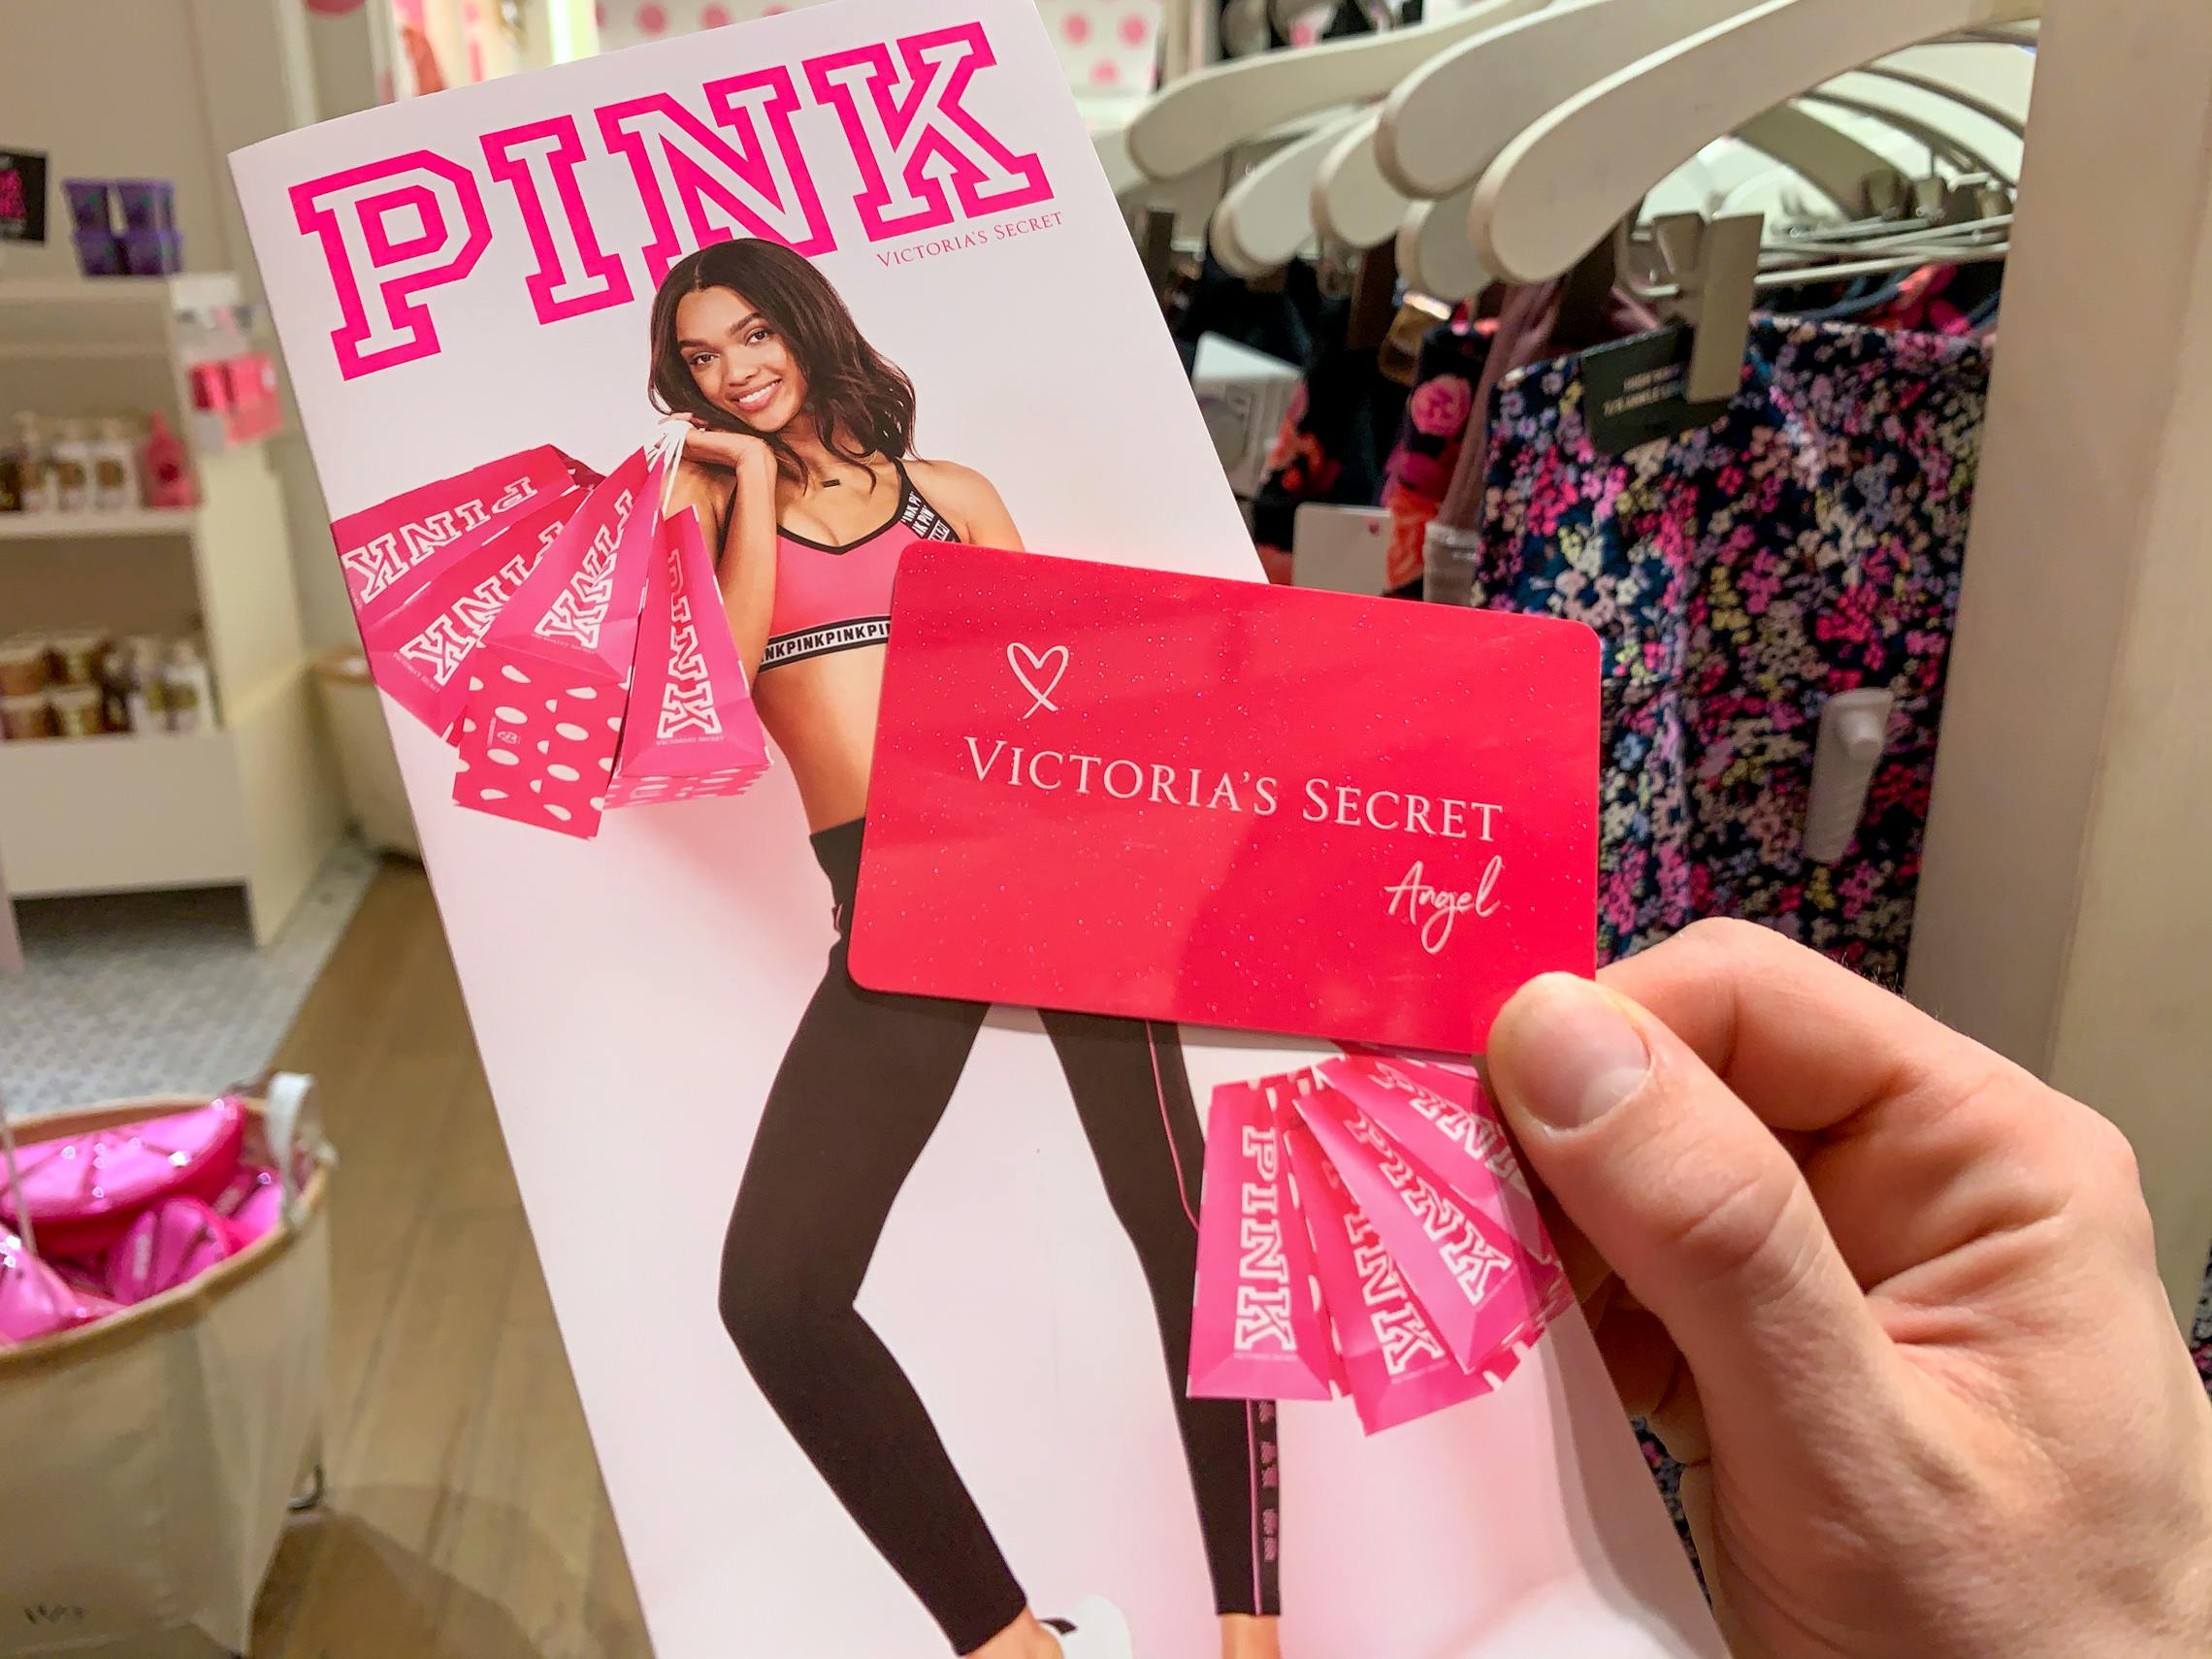 A Victoria's Secret credit card held in front of a Pink pamphlet used for registering for a card.